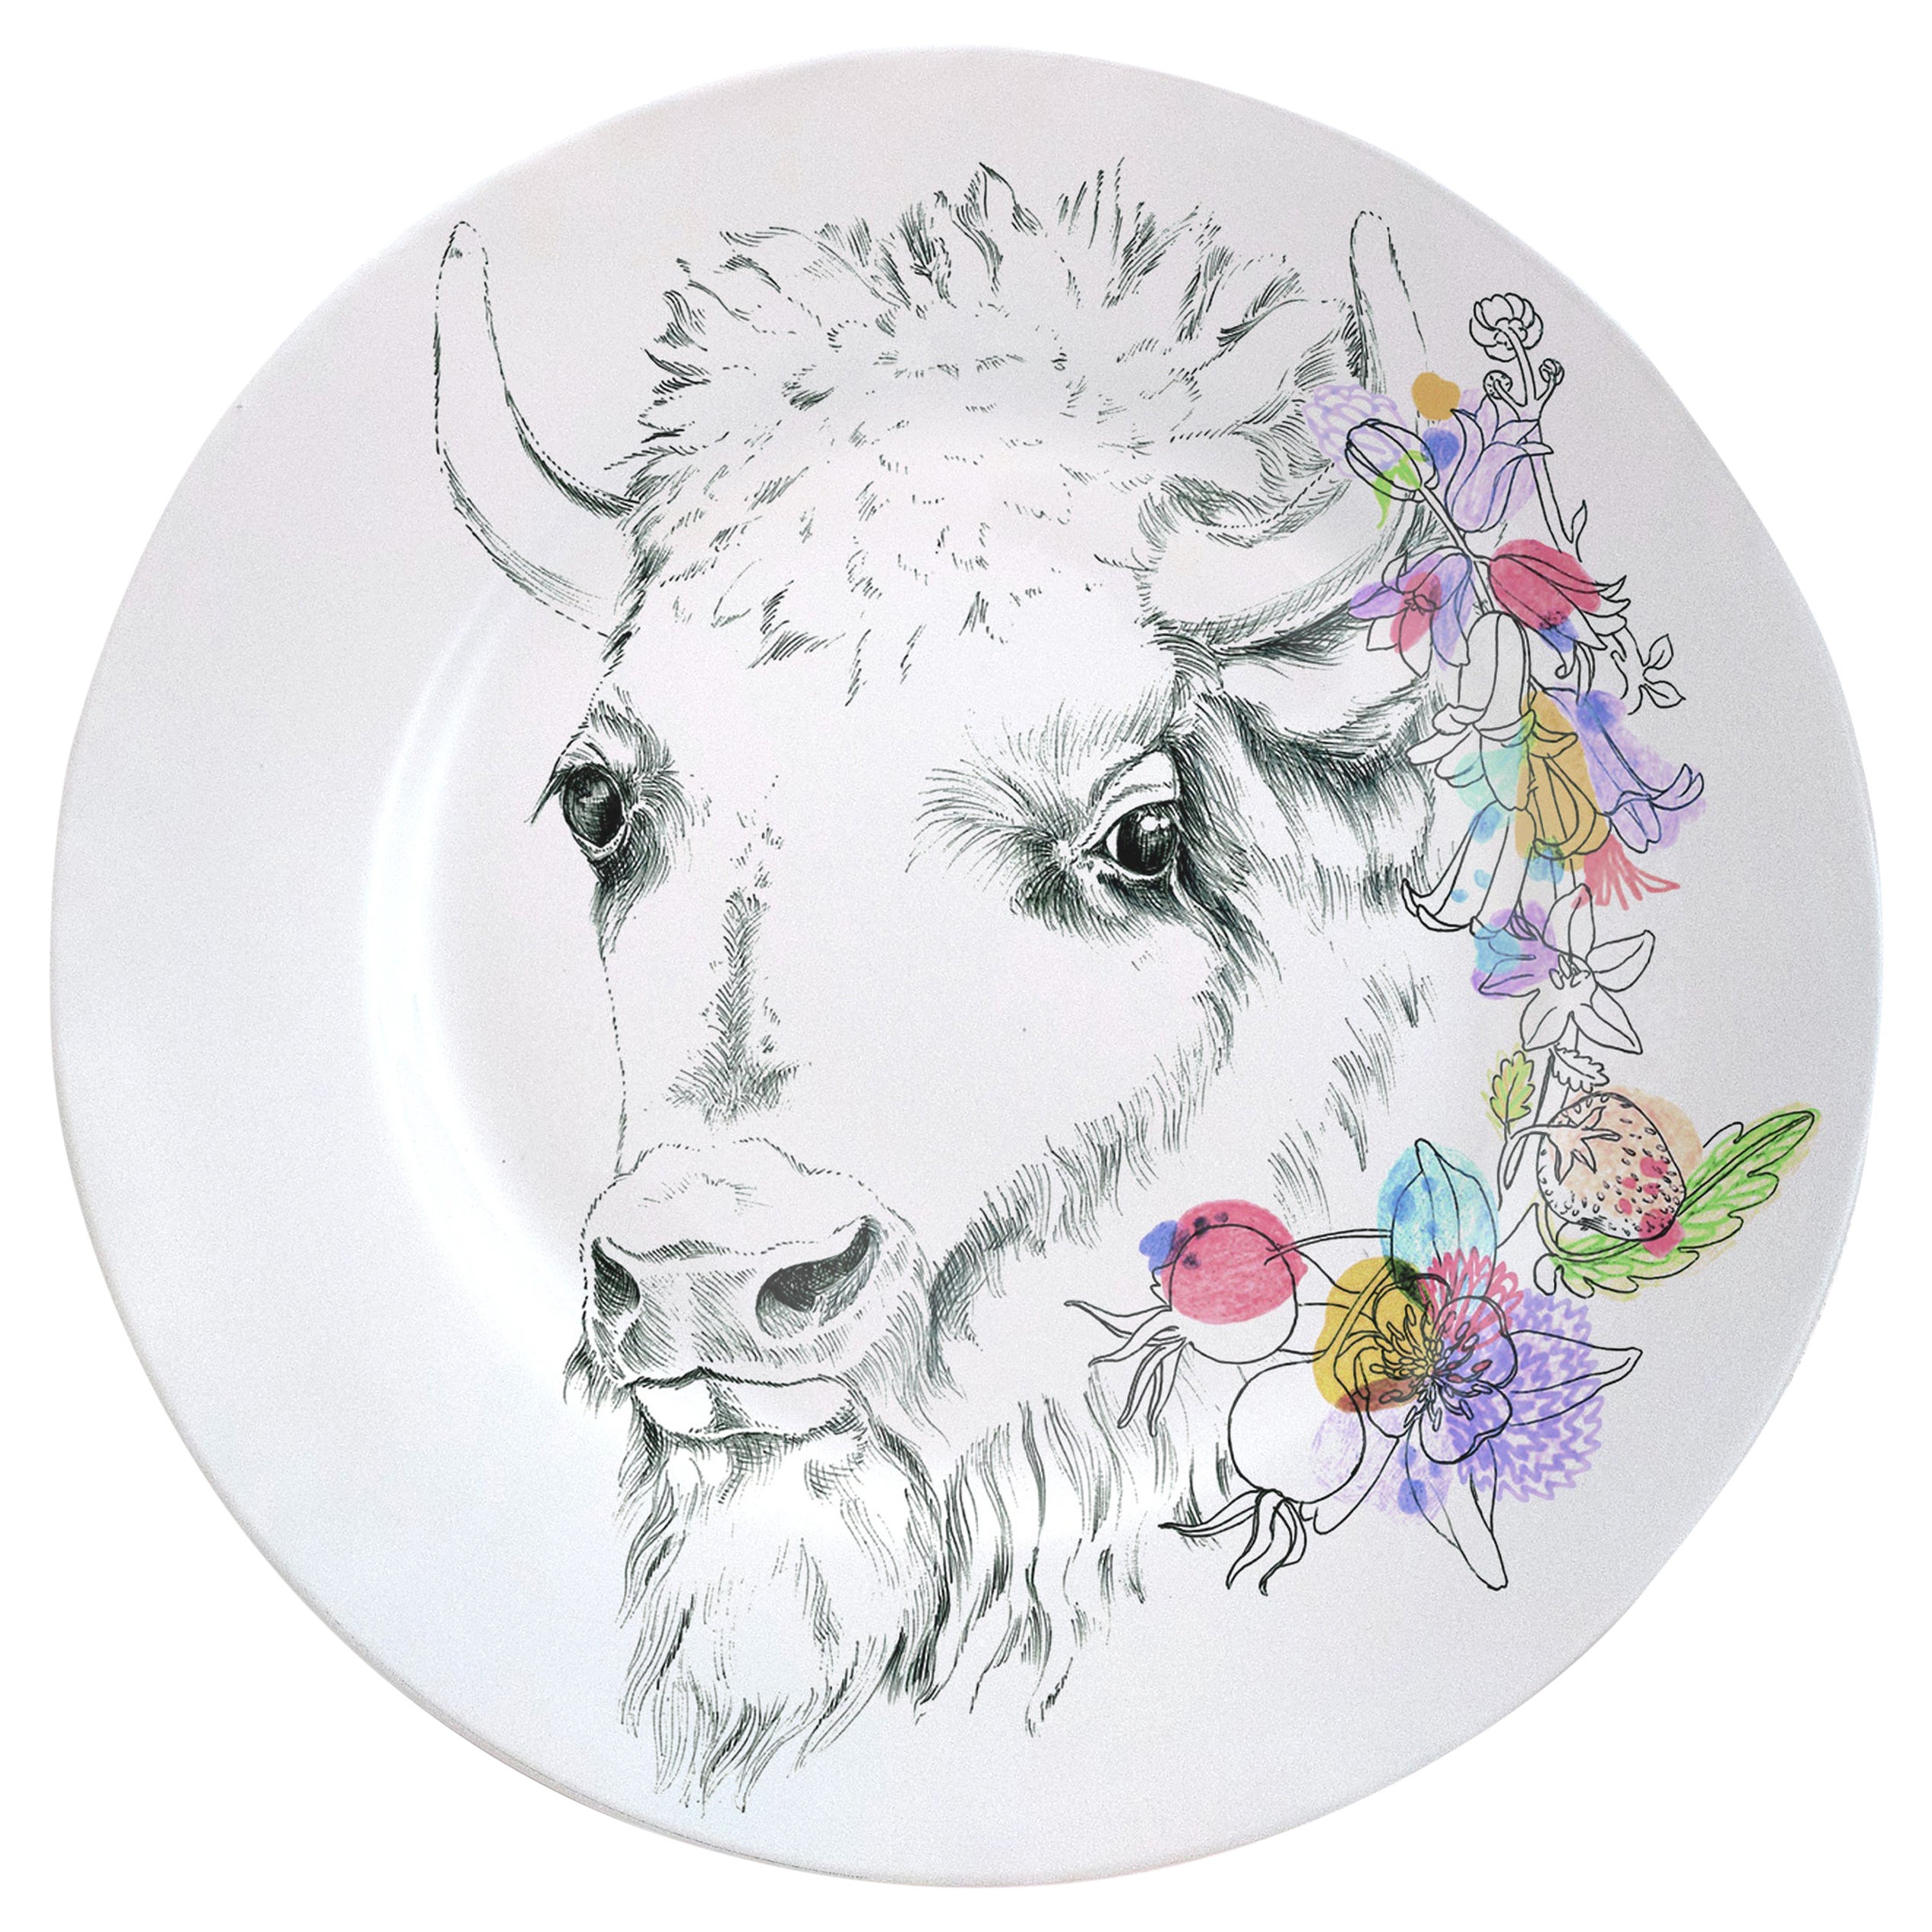 Ode to the Woods, Contemporary Porcelain Dinner Plate with Bison and Flowers For Sale